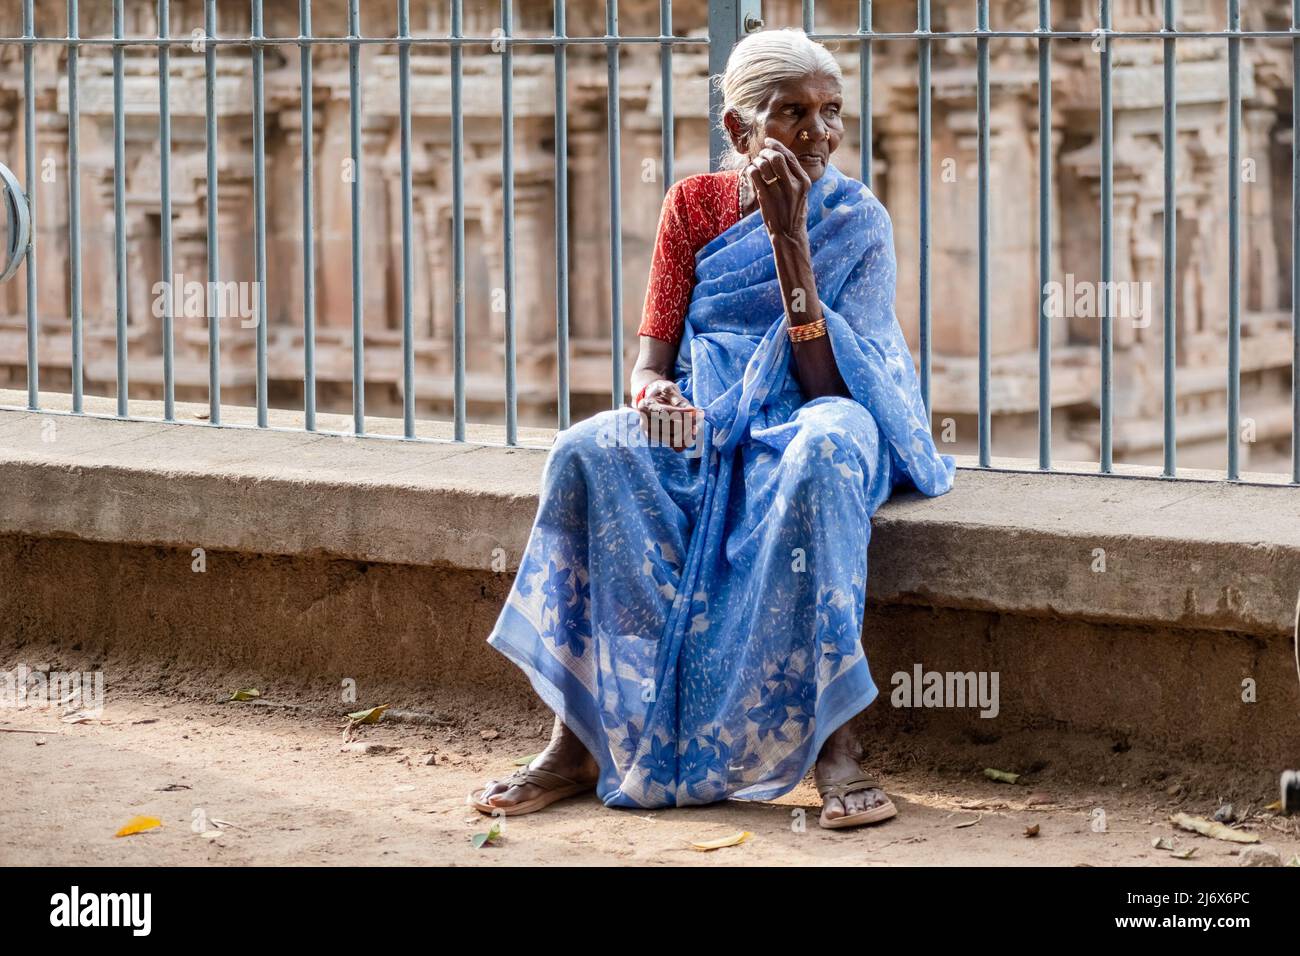 Vellore, Tamil Nadu, India - September 2018: Candid portrait of an elderly Indian woman wearing a blue sari sitting outside an ancient Hindu temple in Stock Photo